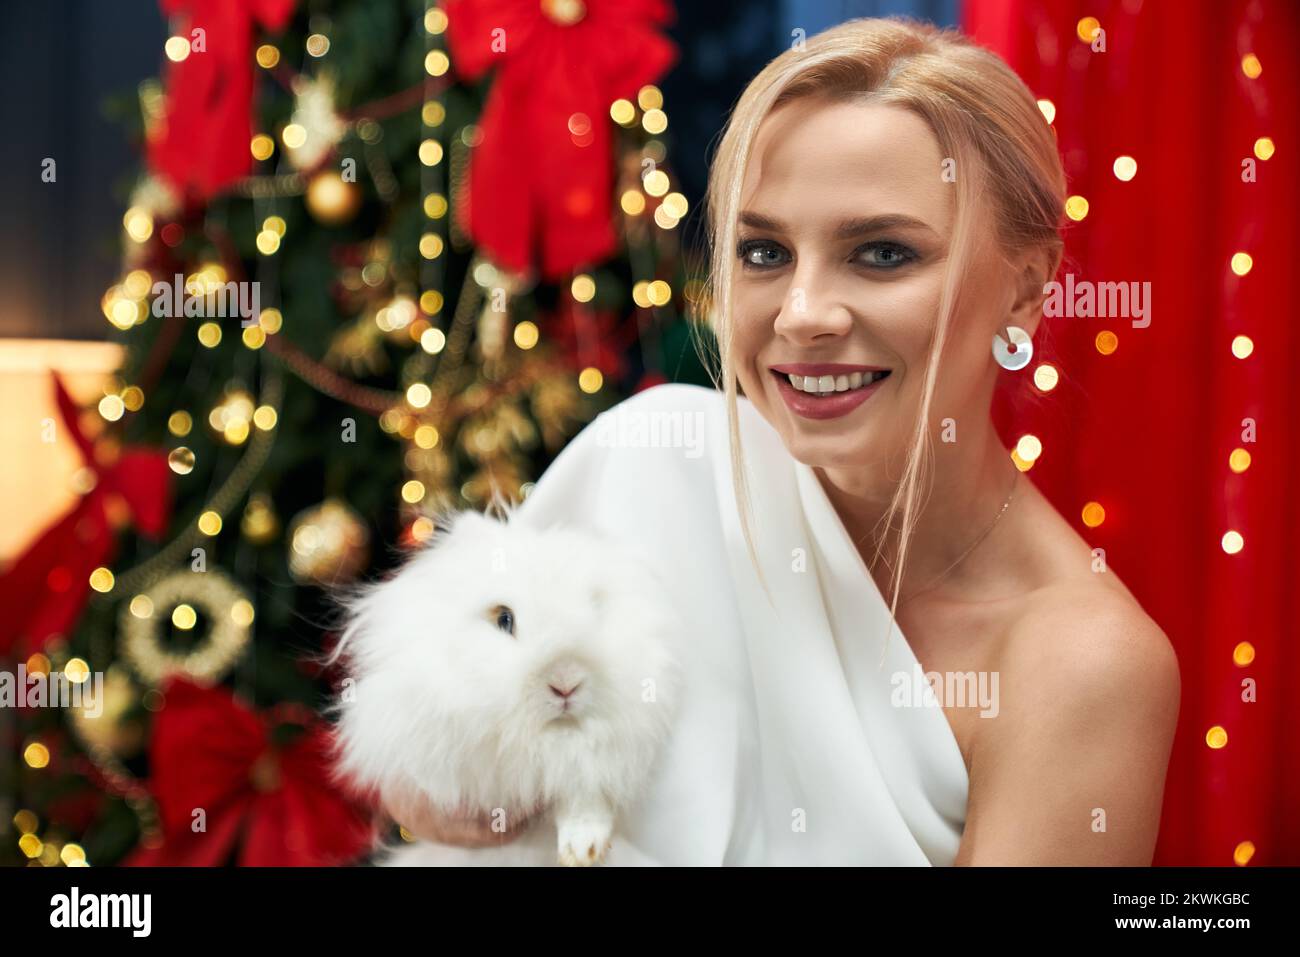 Front view of cheerful, happy lady holding white, furry rabbit. Beautiful, blonde woman wearing white dress, looking at camera, smiling. Concept of holidays and celebration.  Stock Photo